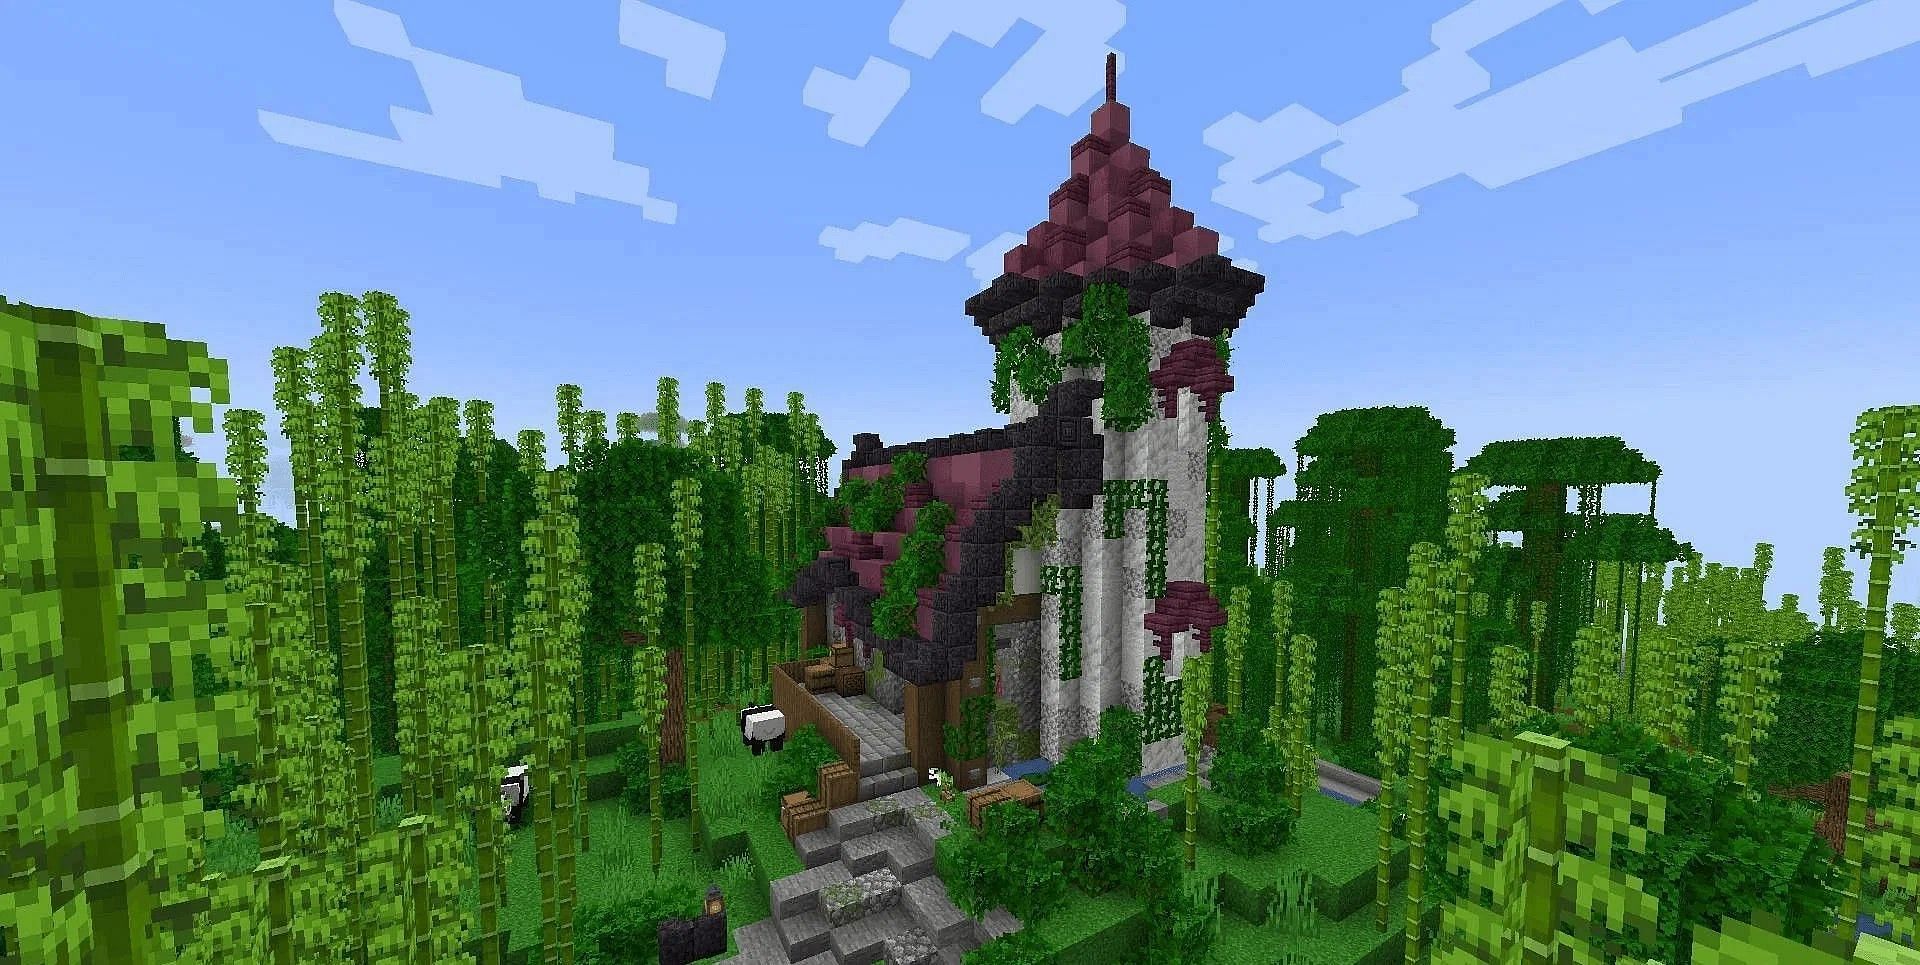 This medieval-style fantasy house still fits in well in a jungle (Image via u/Deogamer25/Reddit)